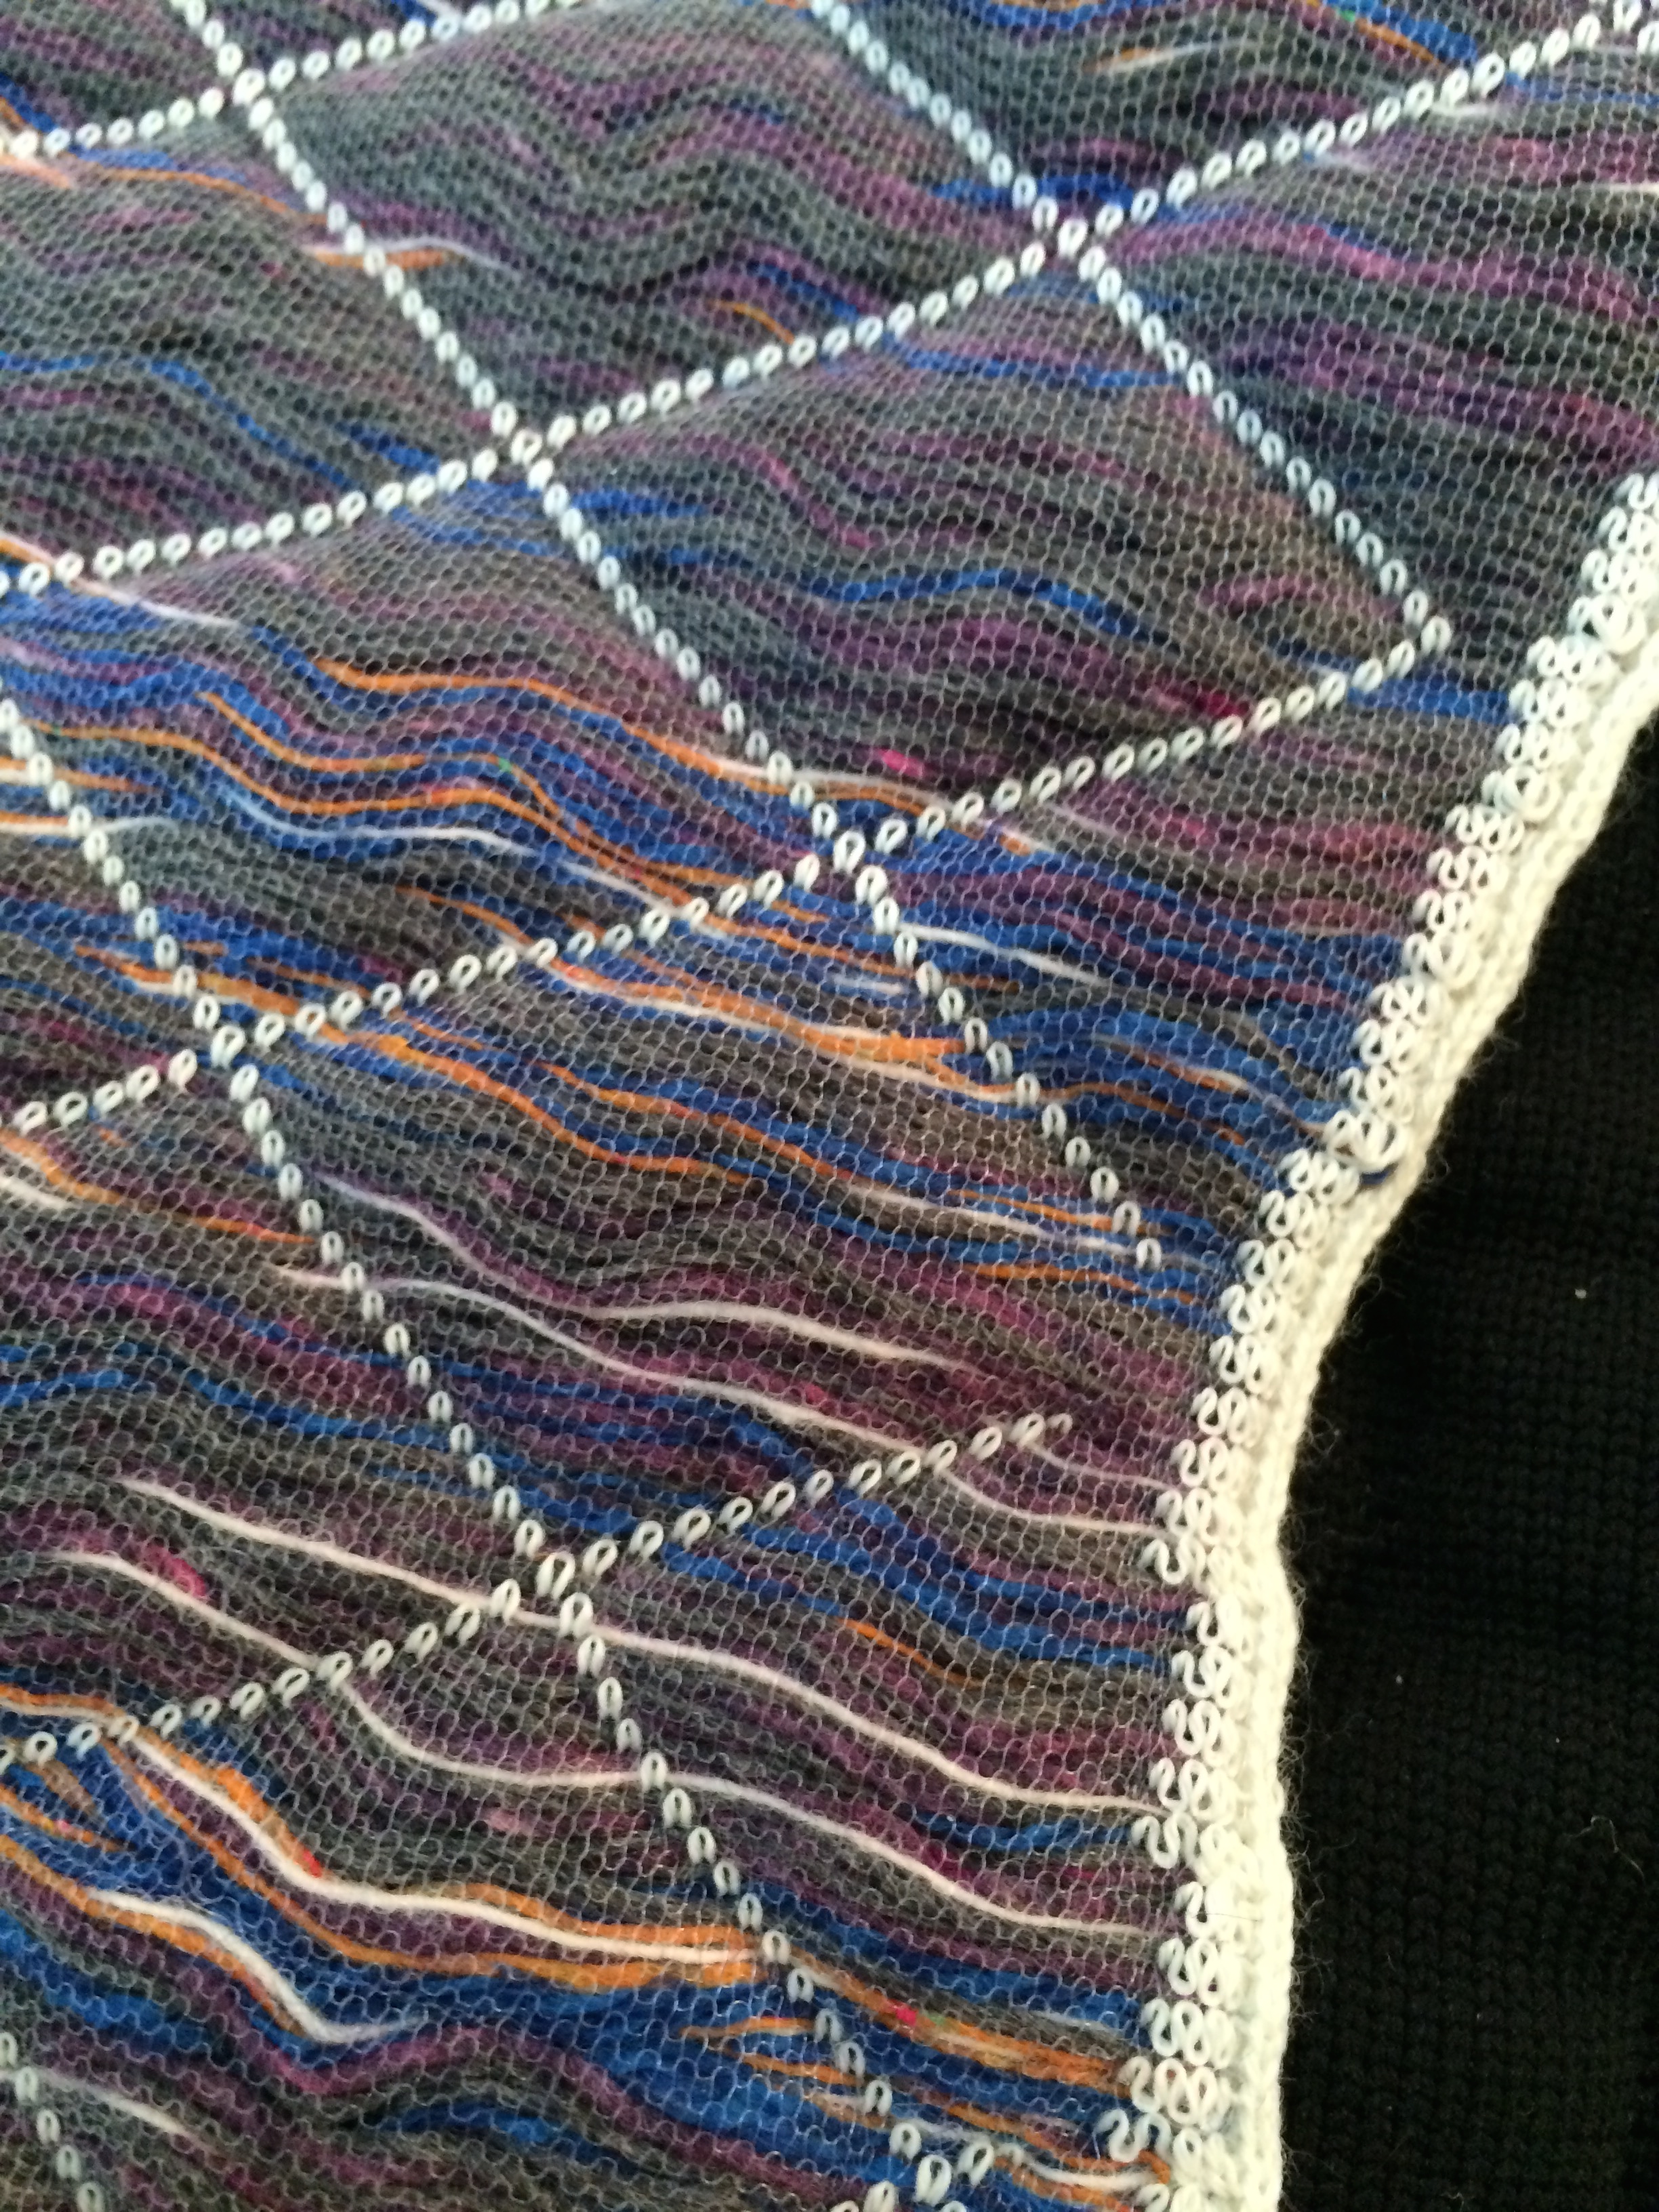 Detail of shaped ‘quilted’ body panel knitted on Shima Seiki’s SRY123LP.